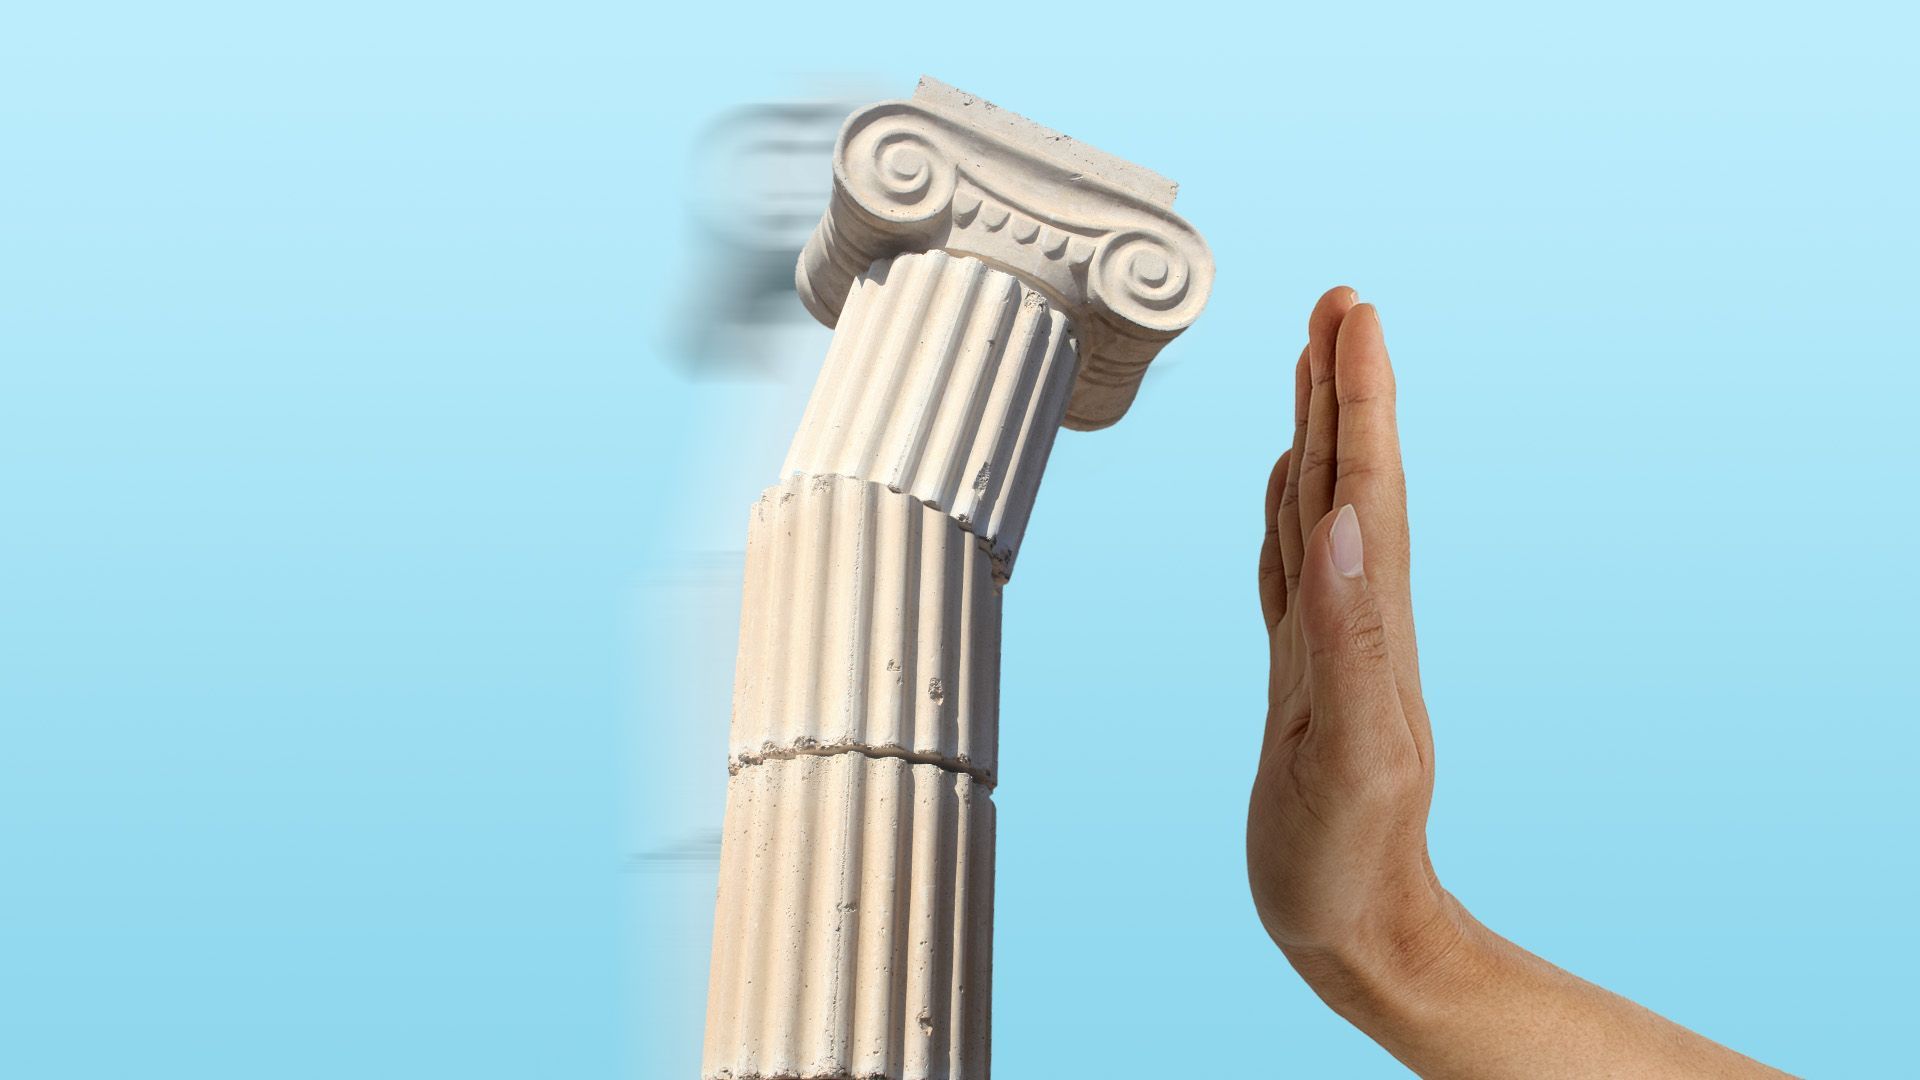 Illustration of a column falling toward an outstretched hand